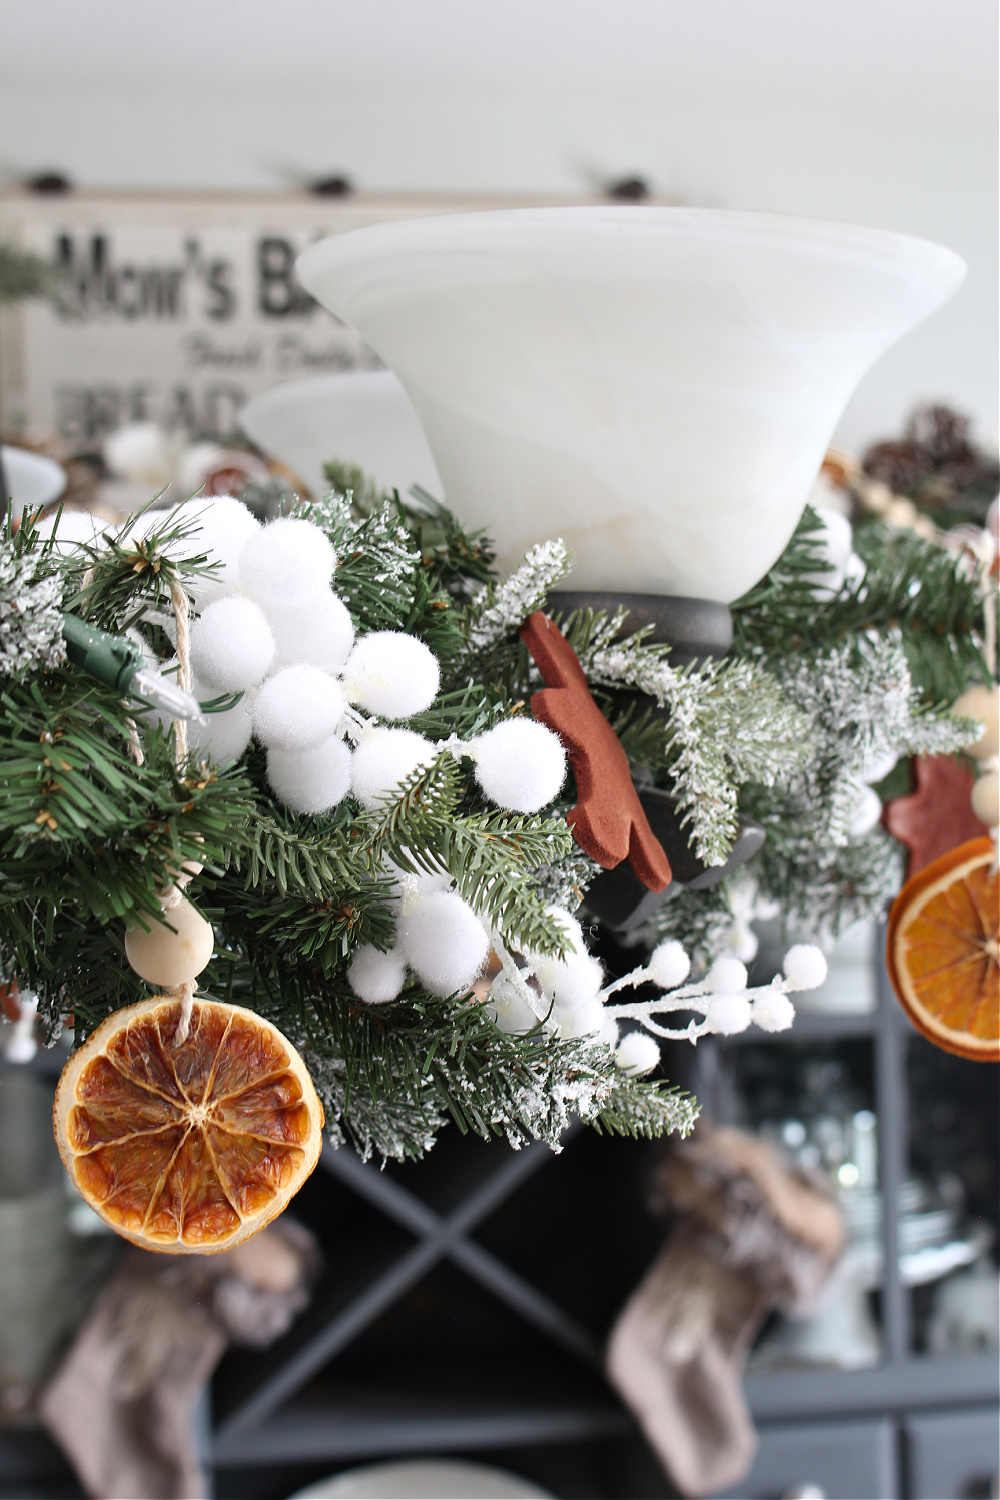 LIght fixture in a dining room dressed up for Christmas with garland and dried oranges.